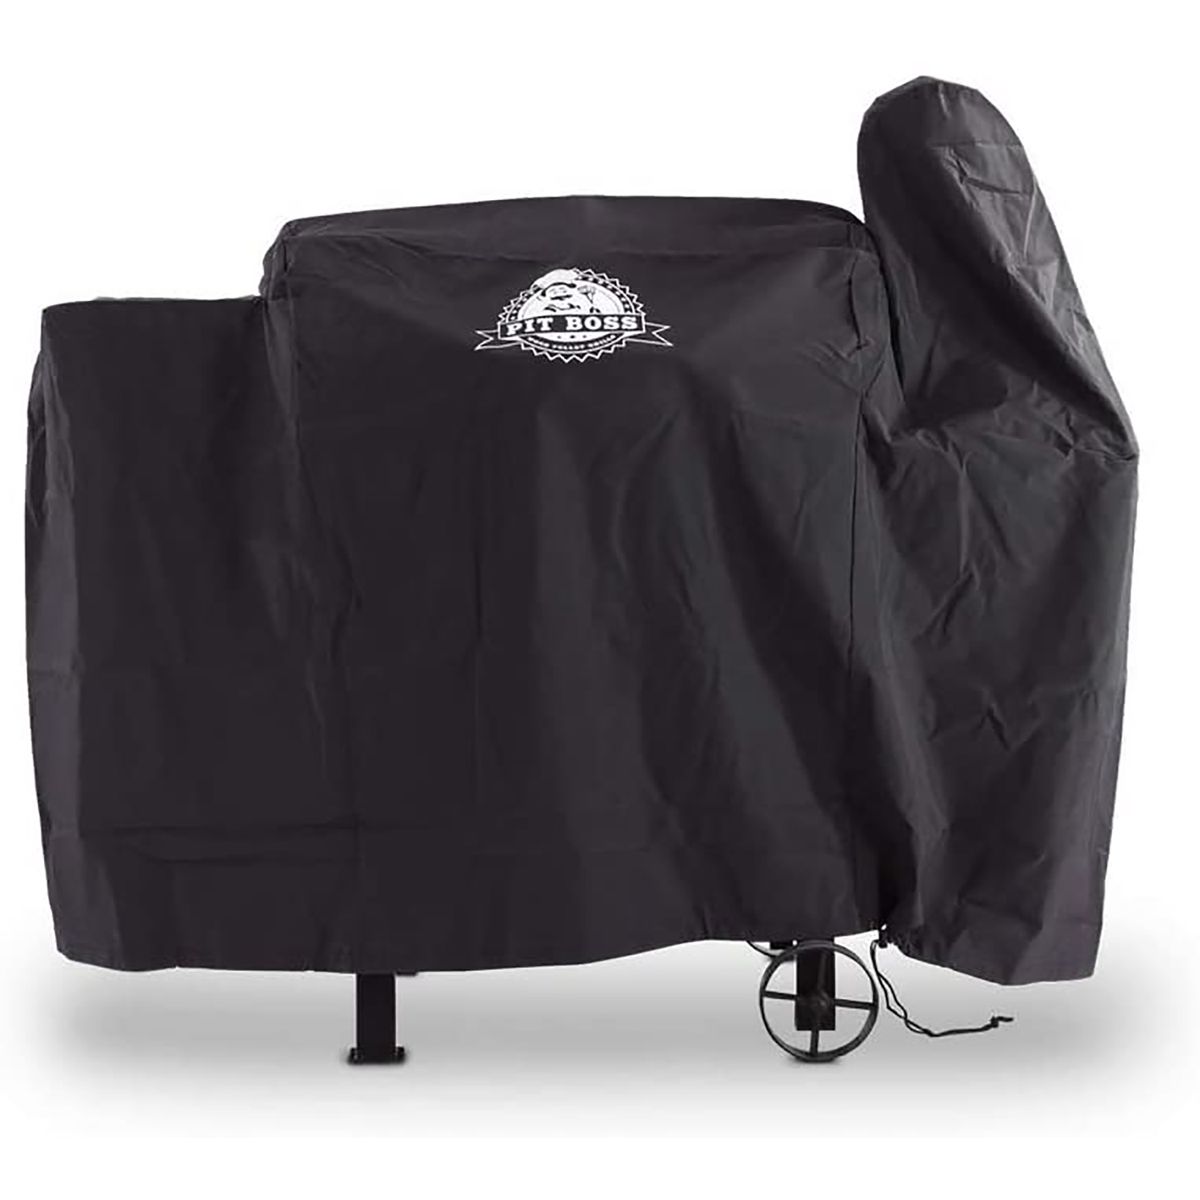 The 10 Best Grill Covers According to Amazon Shoppers Food & Wine